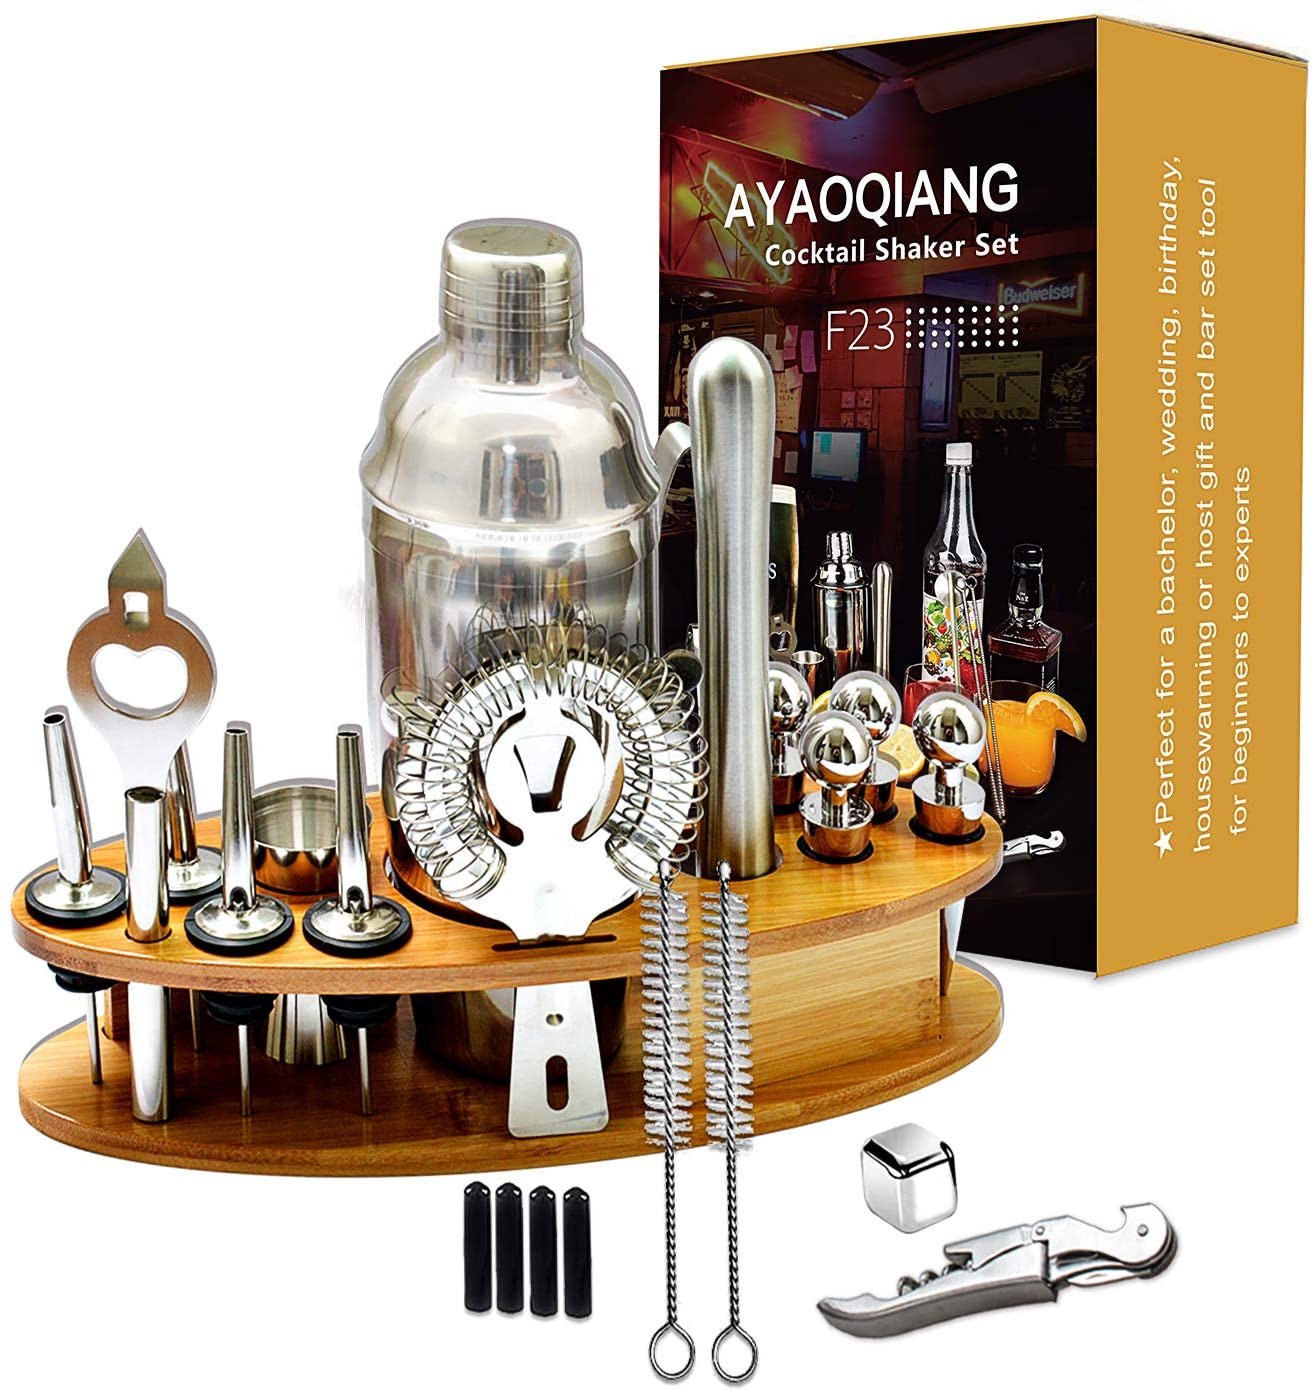 full cocktail shaker kit and accessories with original packaging and wooden stand